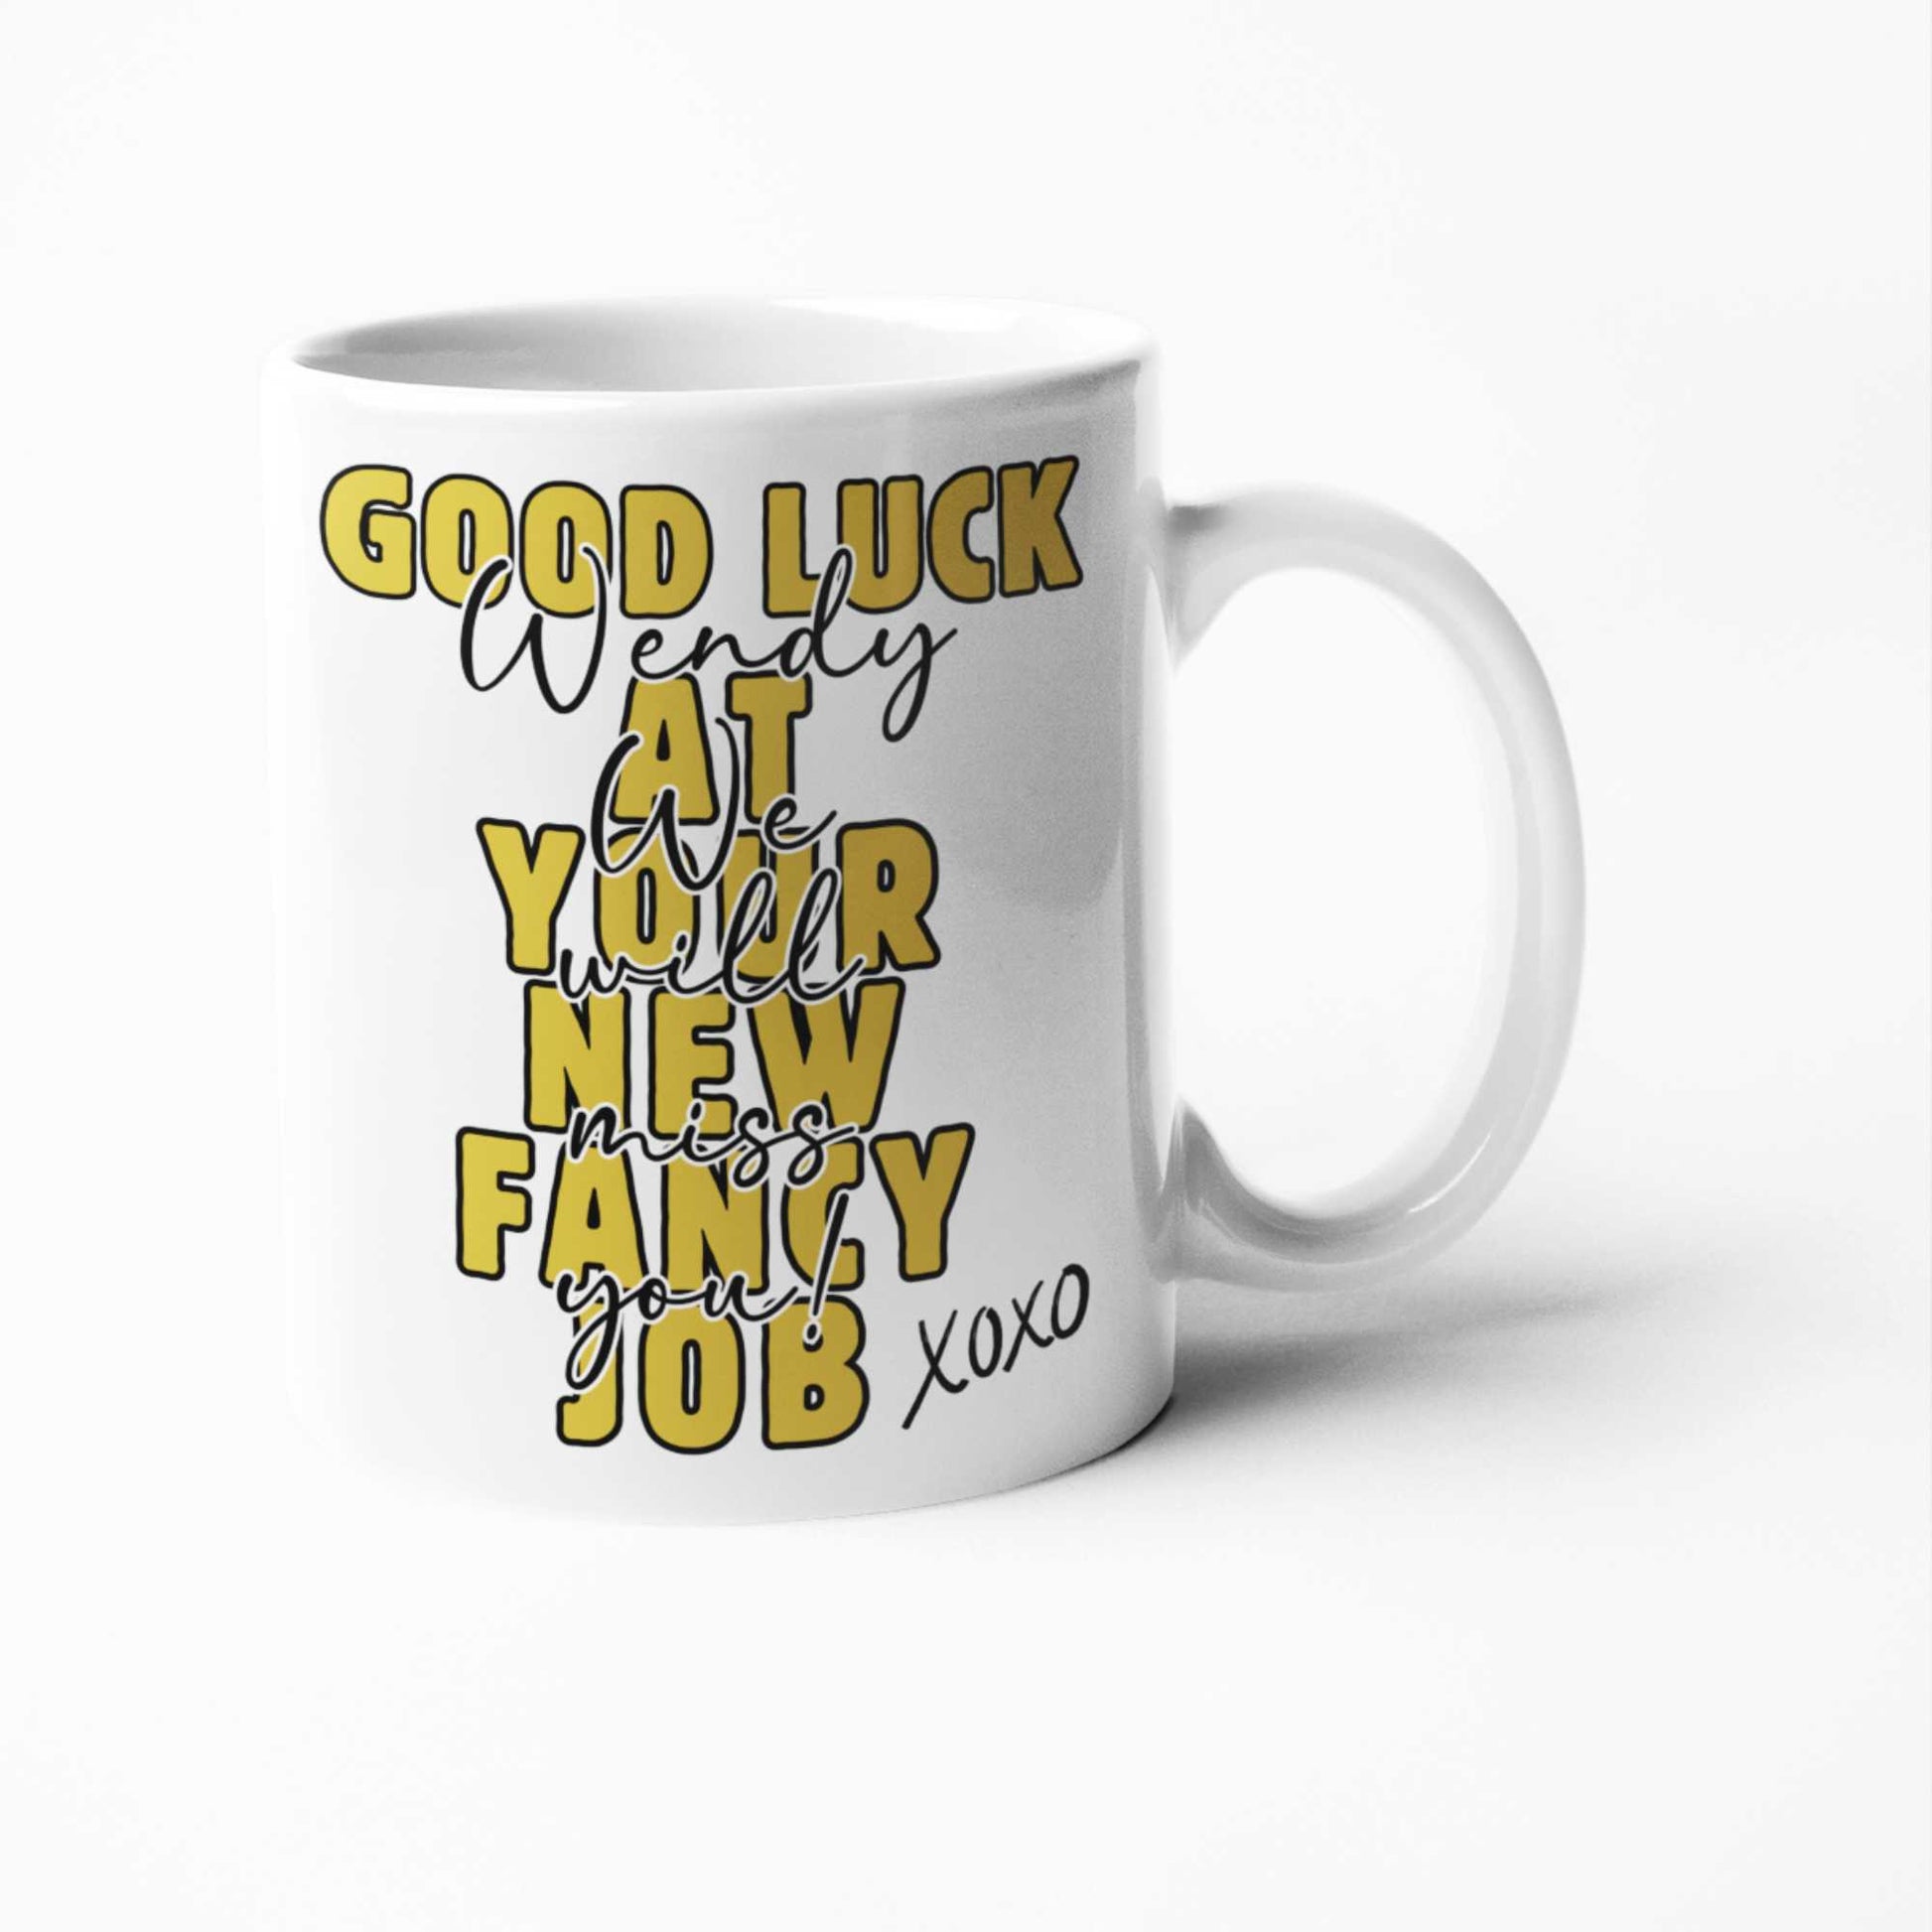 good luck at new job co-worker colleague leaving gift personalised coffee mug white 11oz work bestie leaving present